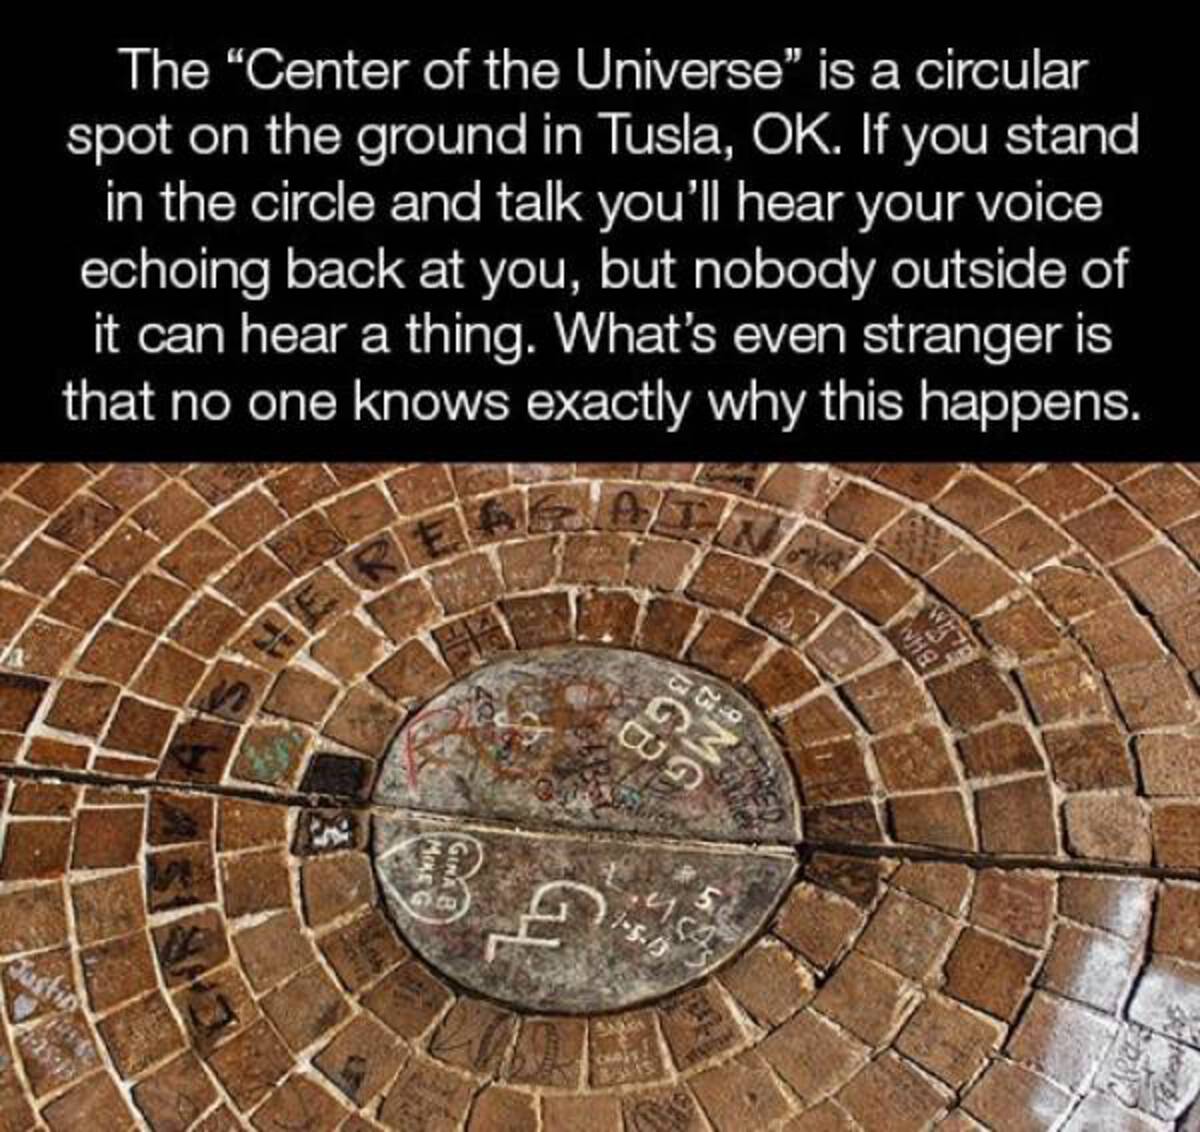 circle - The "Center of the Universe" is a circular spot on the ground in Tusla, Ok. If you stand in the circle and talk you'll hear your voice echoing back at you, but nobody outside of it can hear a thing. What's even stranger is that no one knows exact